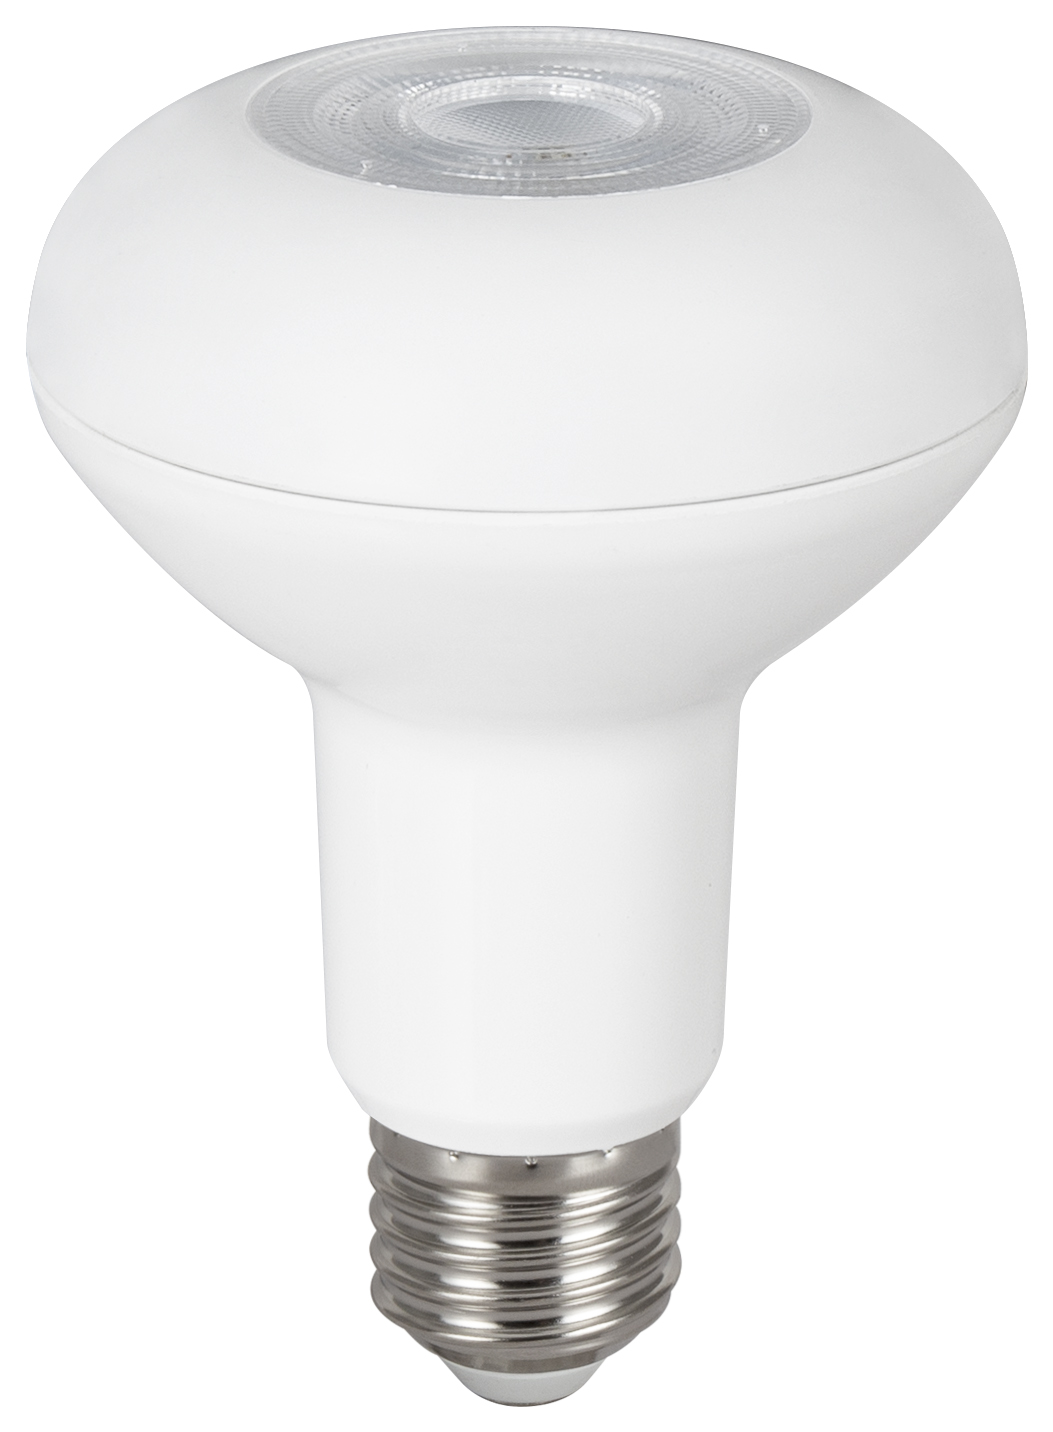 Image of Wickes Non-Dimmable R80 Frosted Reflector LED E27 7W Light Bulb